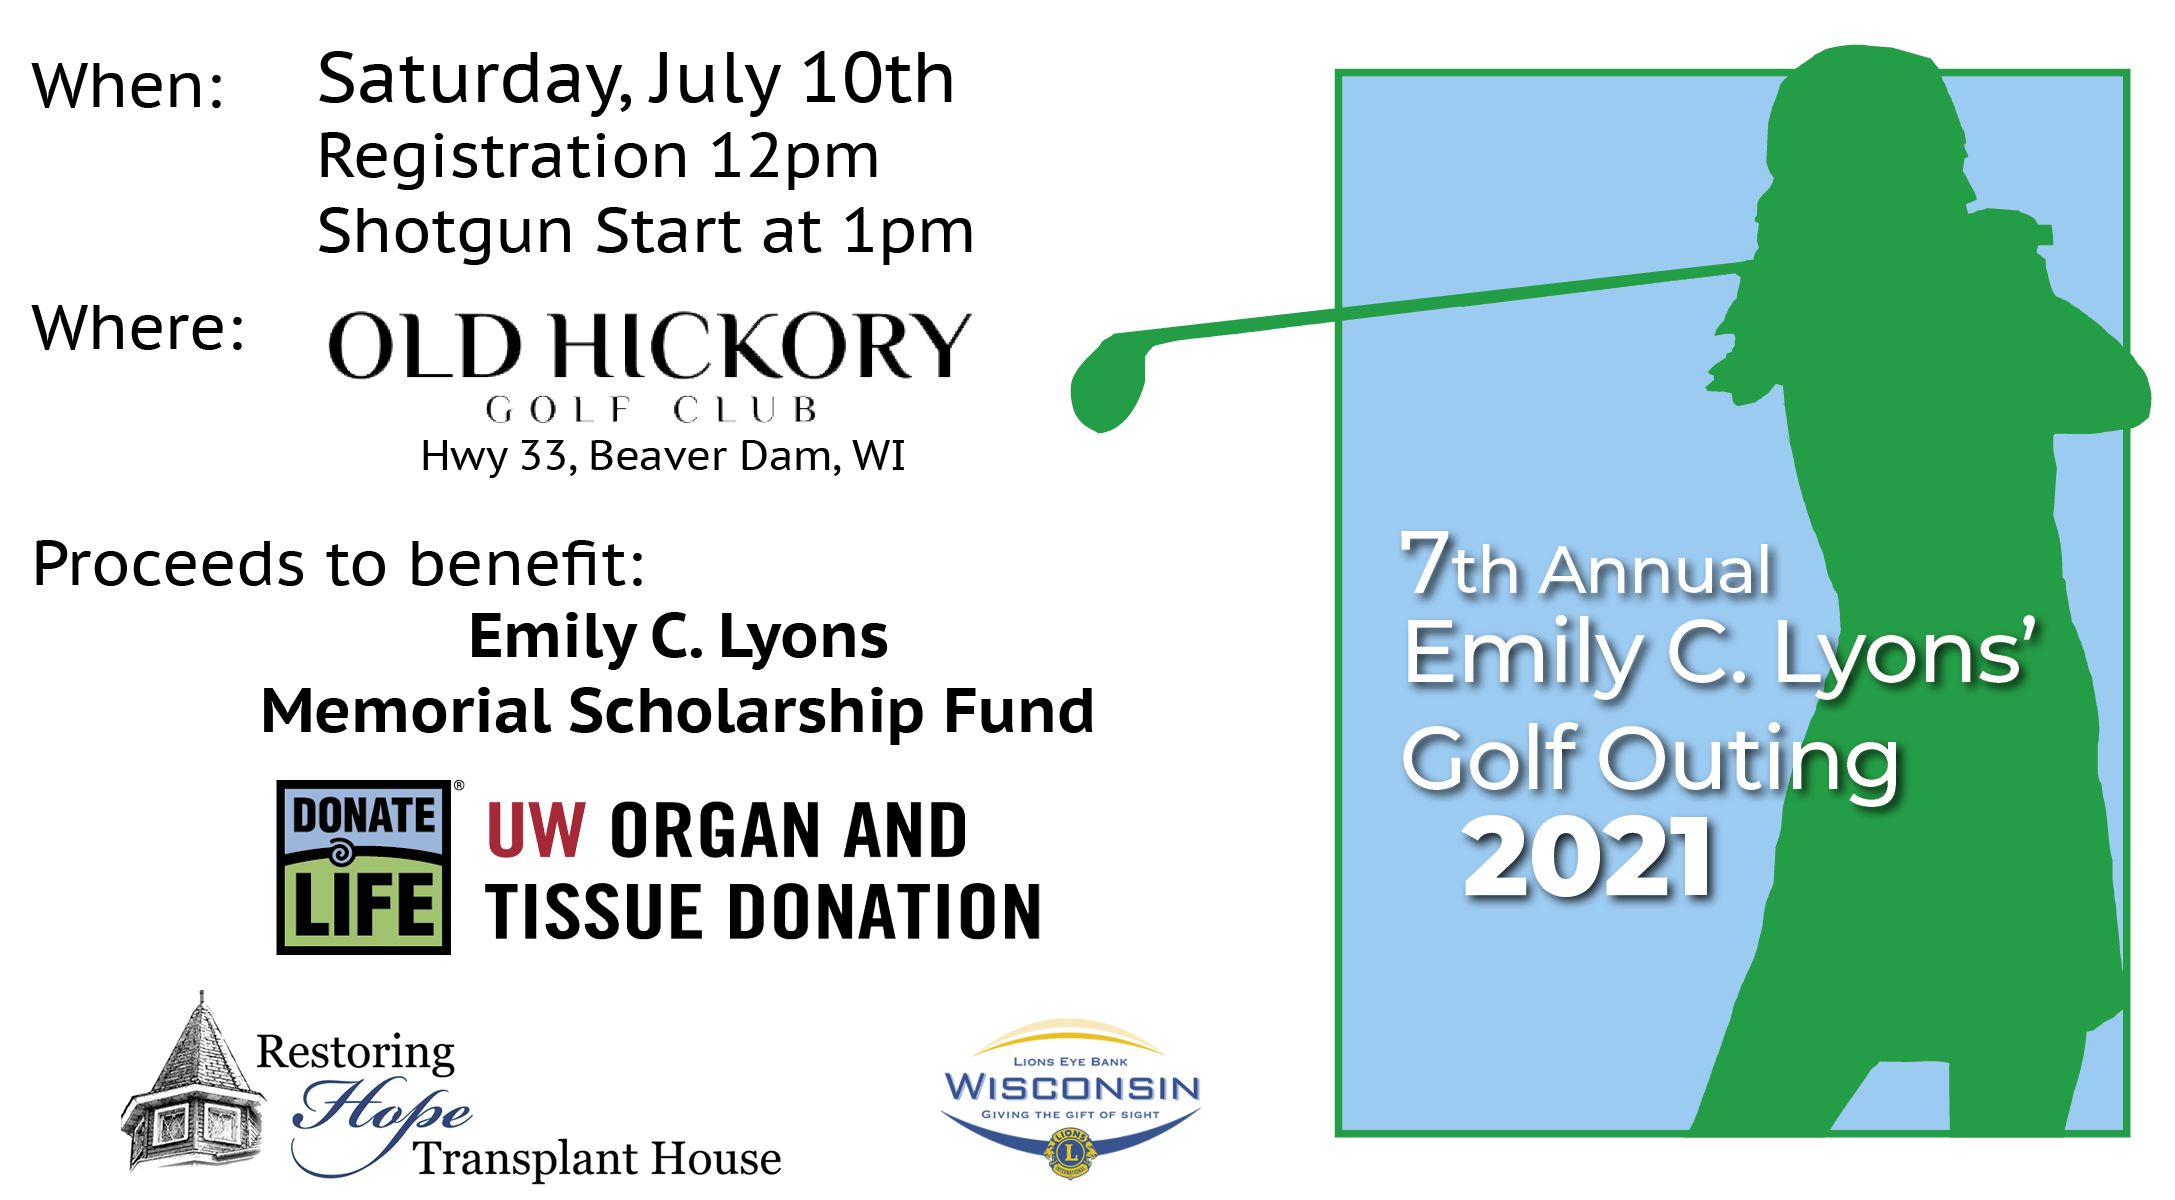 Emily C. Lyons' 7th Annual Memorial Golf Outing